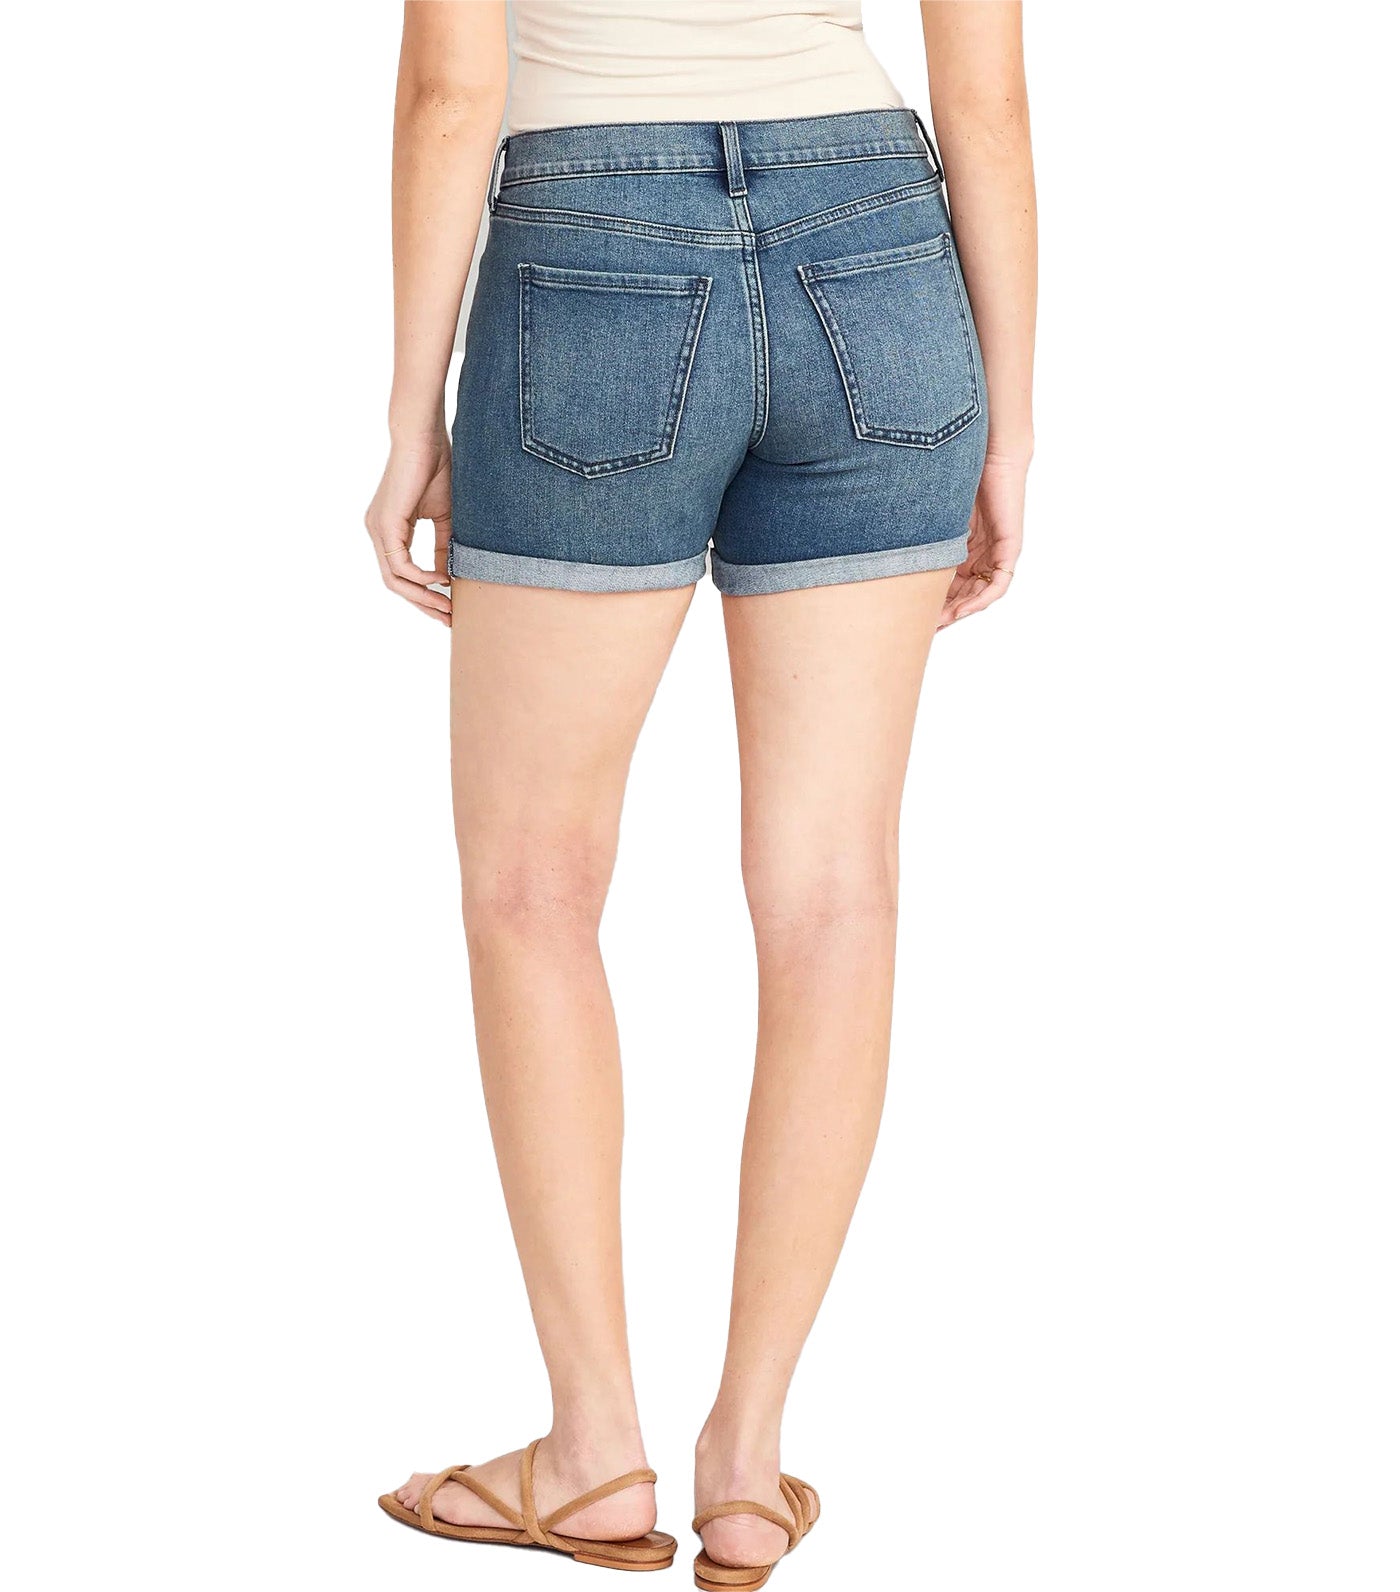 Mid-Rise Wow Jean Shorts for Women - 5in Inseam Campeche